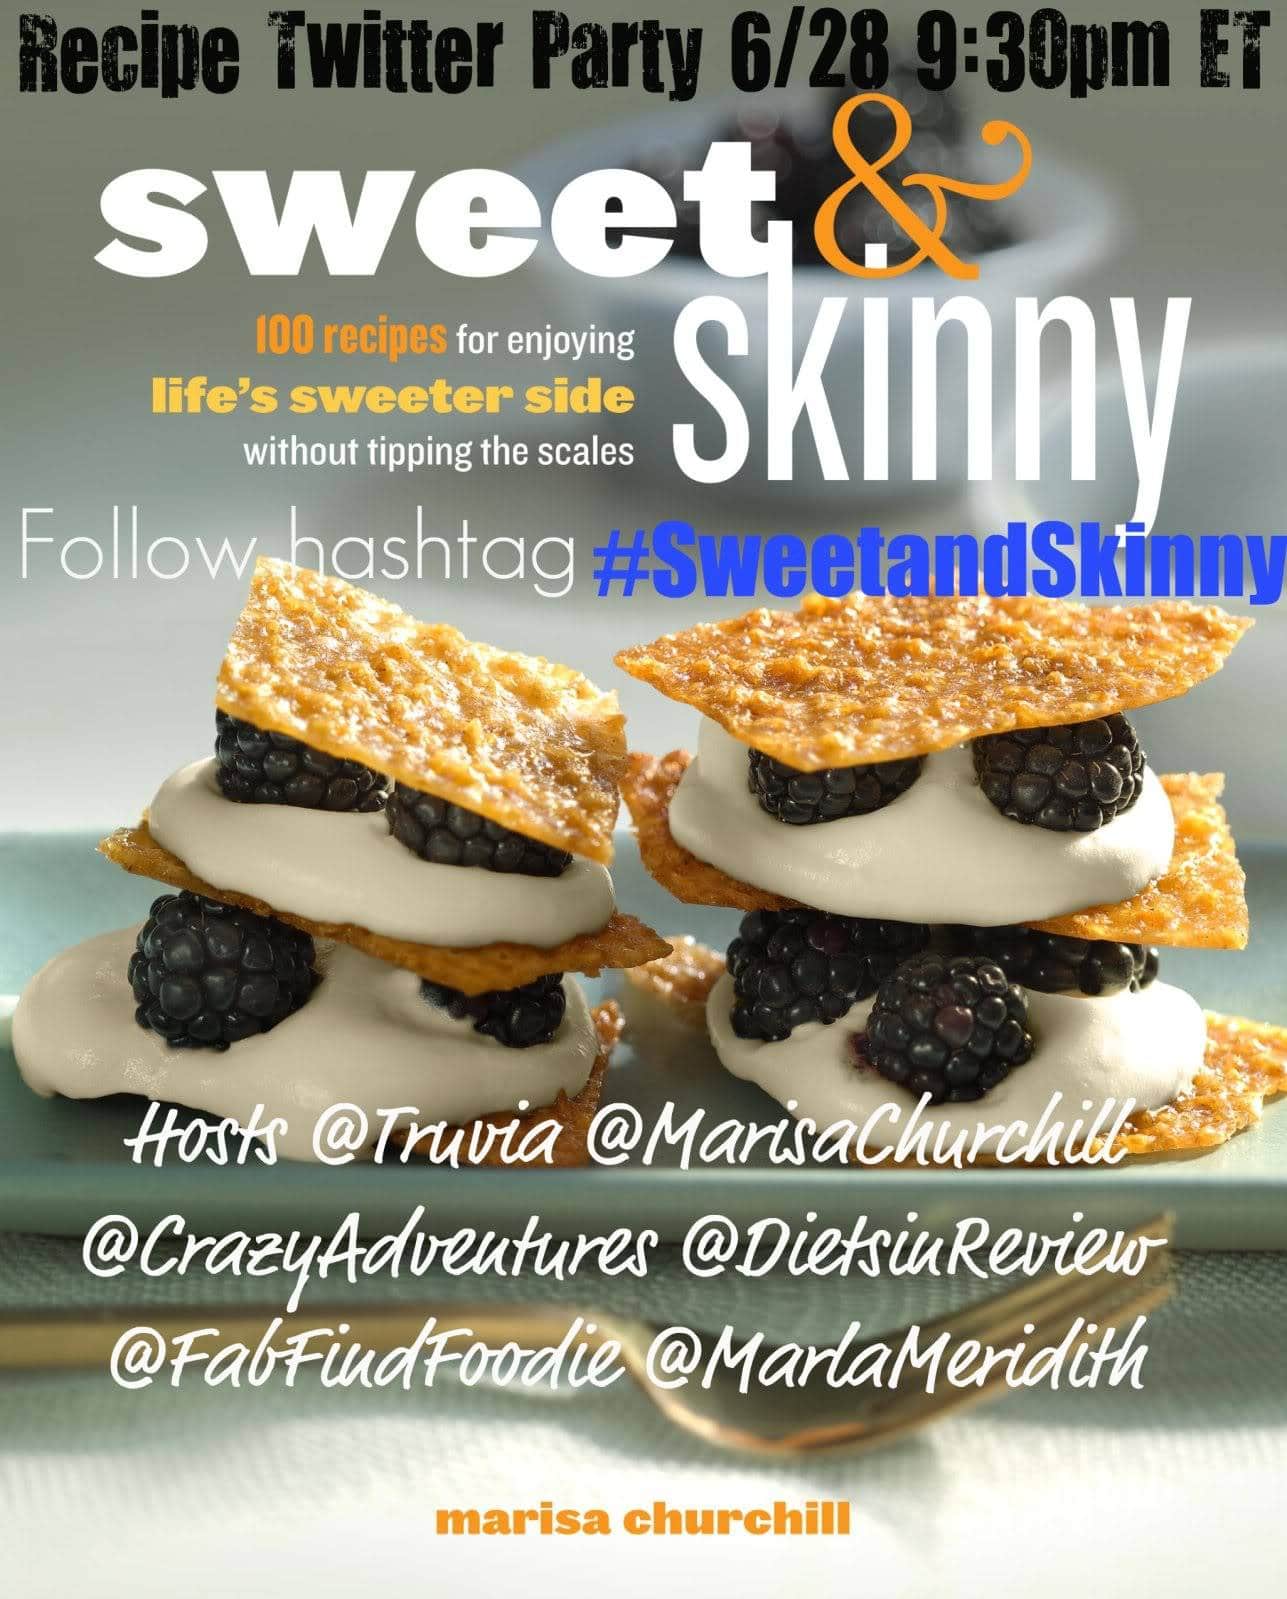 Sweet and Skinny Recipe Twitter Party with Truvia and Marisa Churchill